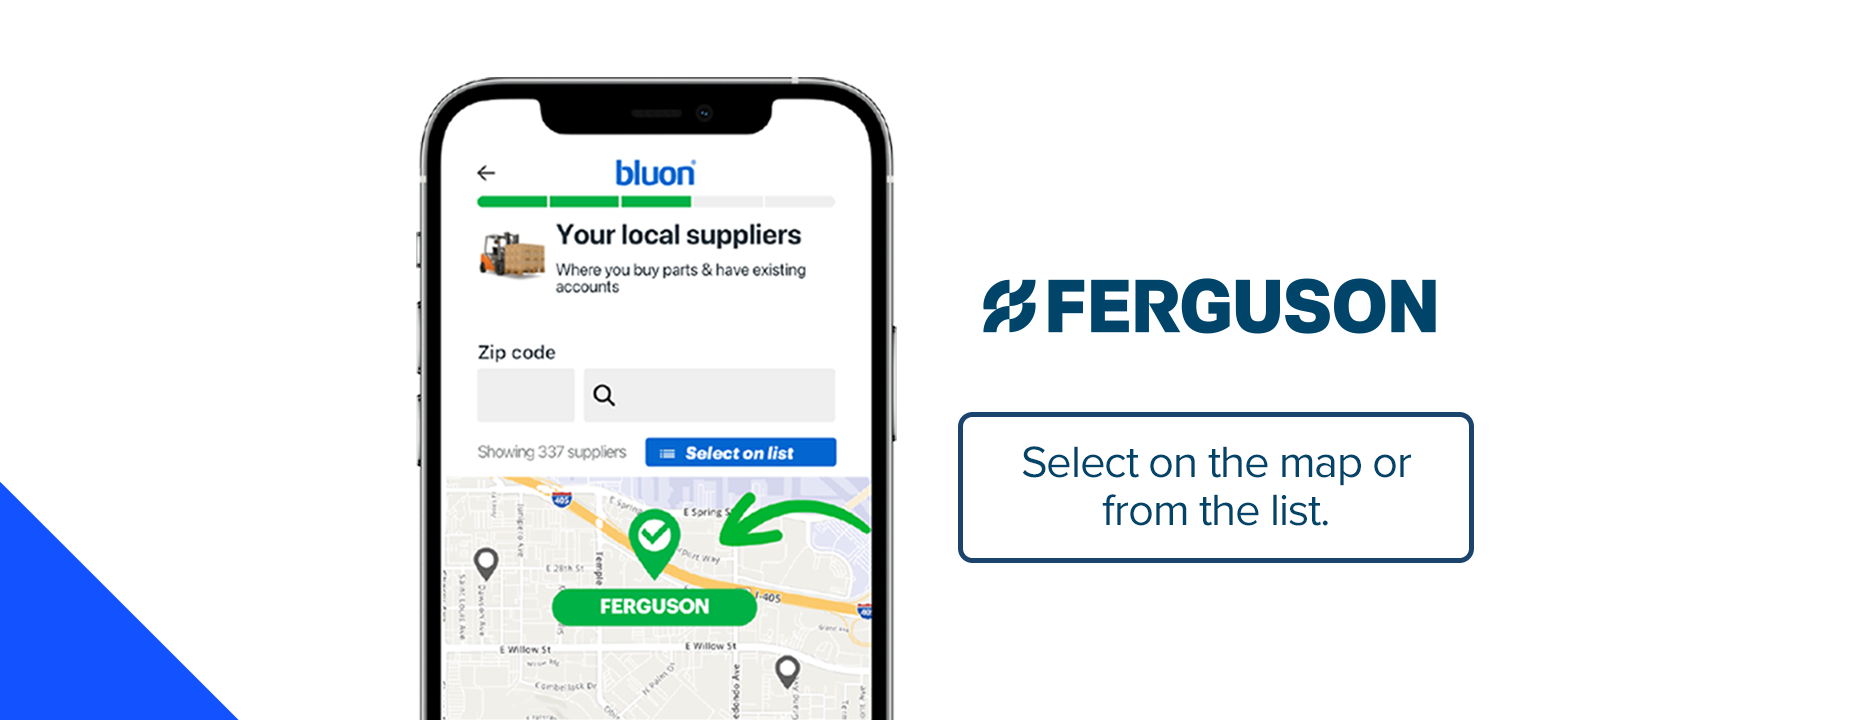 Screenshot of selecting Ferguson as your local supplier on the Bluon app.